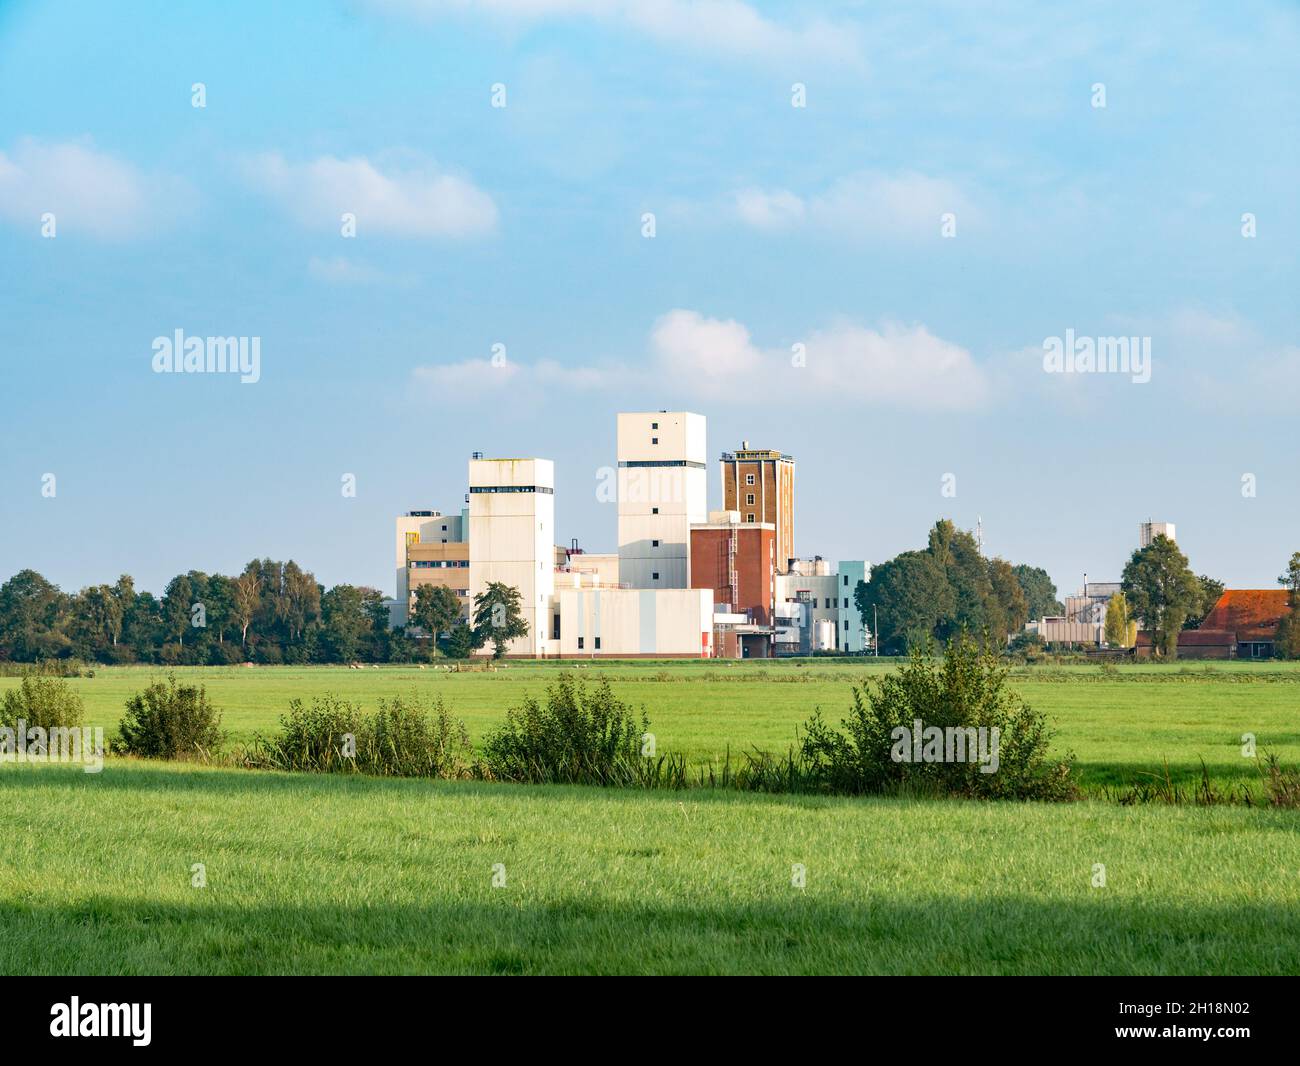 Buildings of Douwe Egberts coffee, tea and tobacco factory in Joure, Friesland, Netherlands Stock Photo